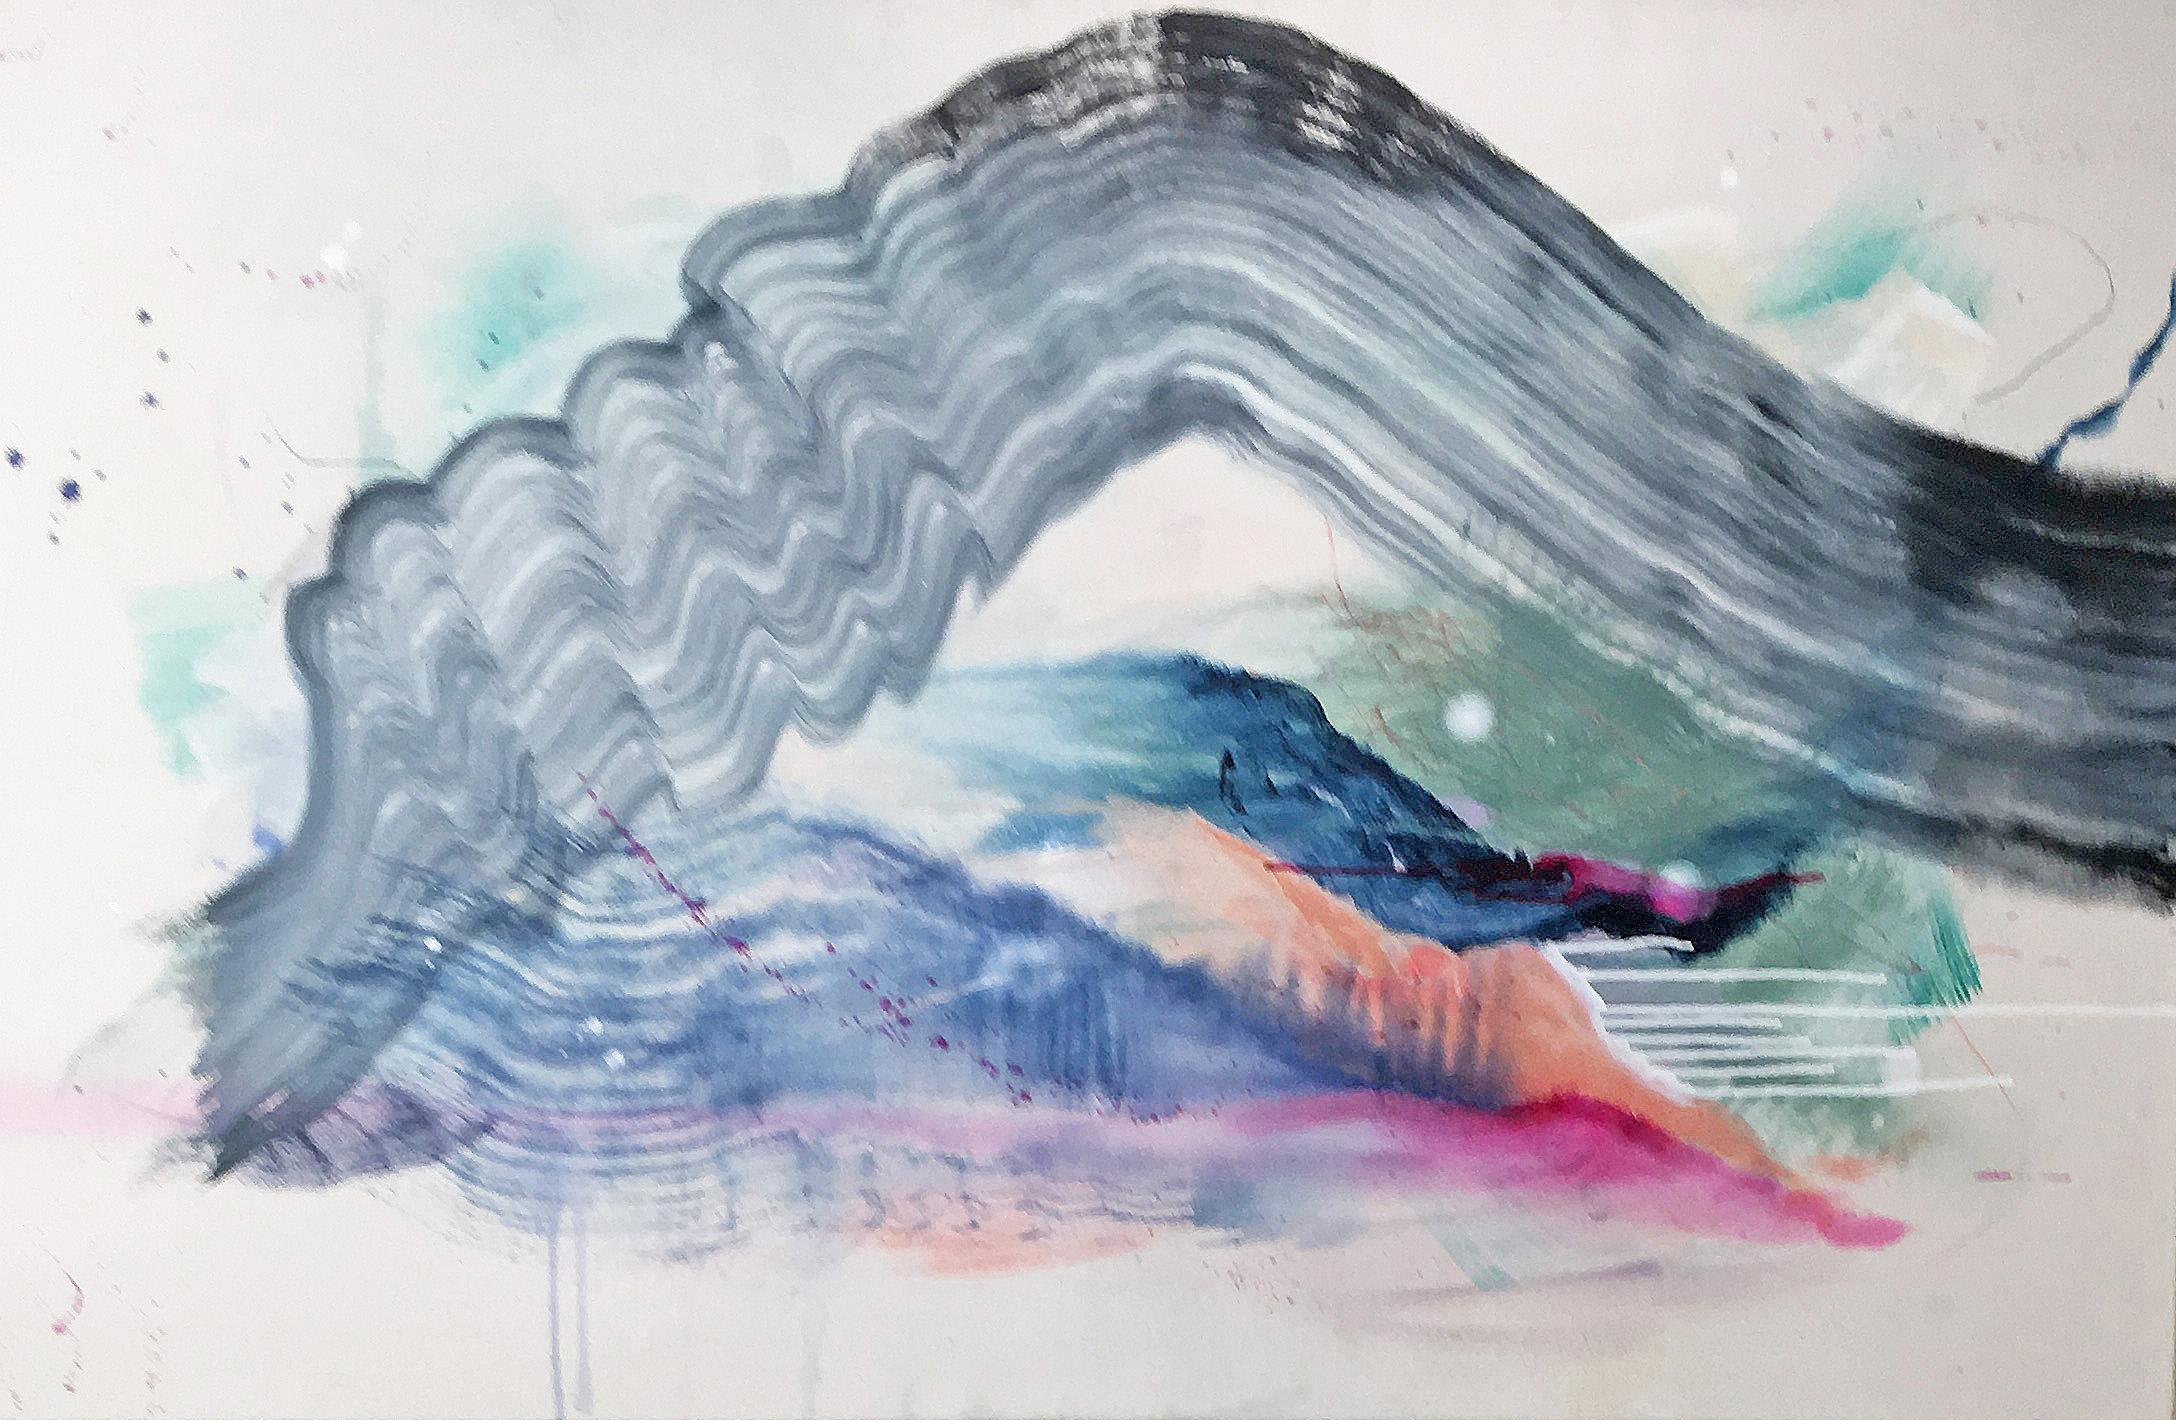 'Conversations Under Water II' 2019 by American artist, Rebecca Stern. Acrylic and ink on canvas, 60 x 38 in. Stern's artwork explores themes of motivation, control, chance, change, and balance. Gestural marks within the work produce a visual